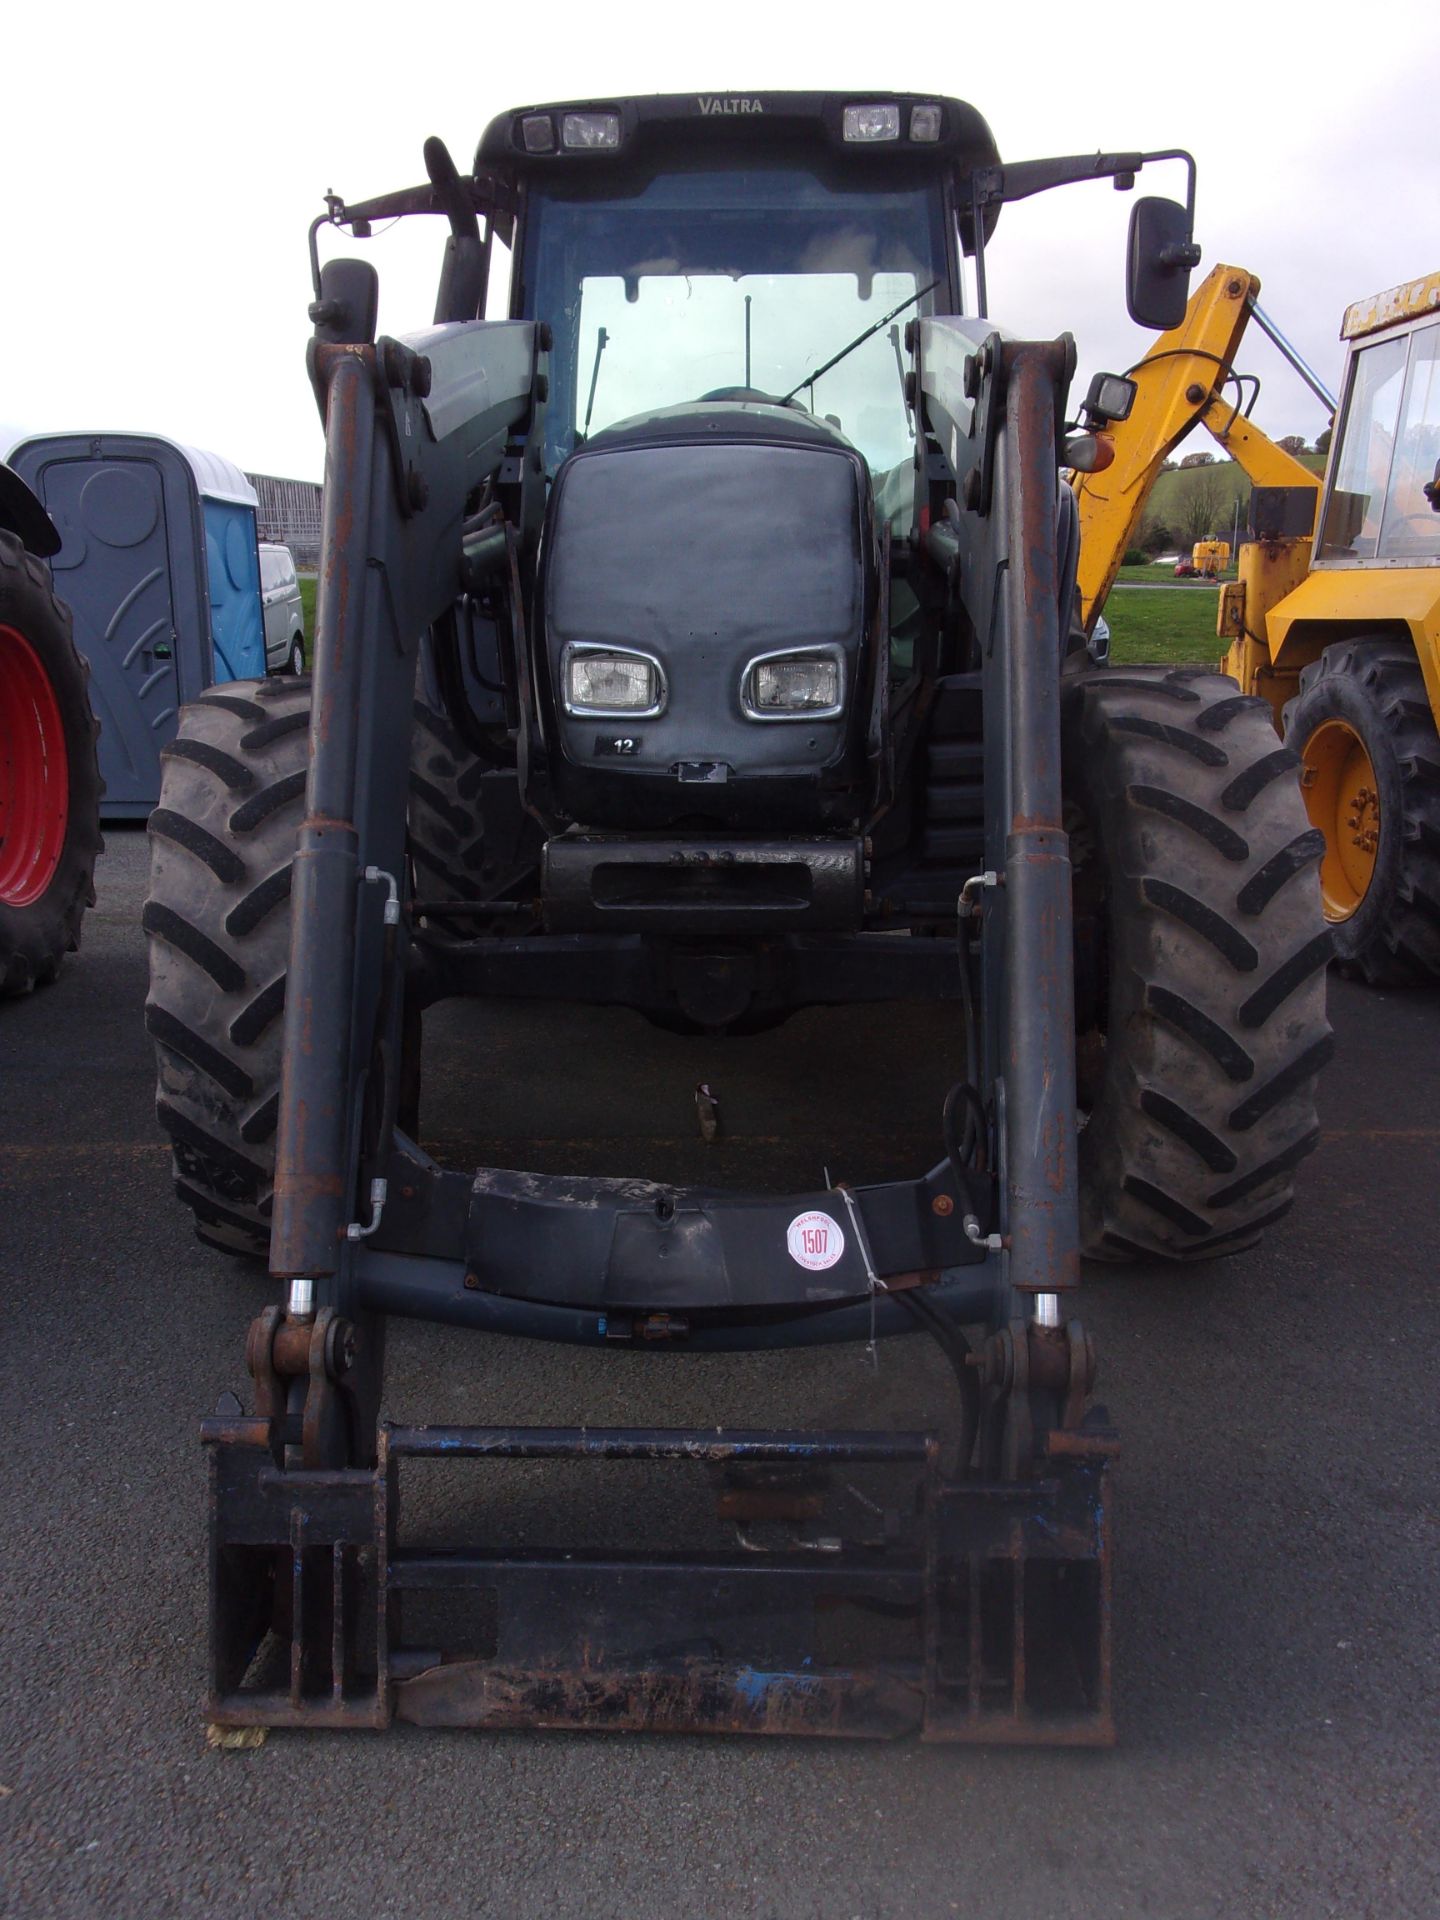 VALTRA TRACTOR WITH LOADER